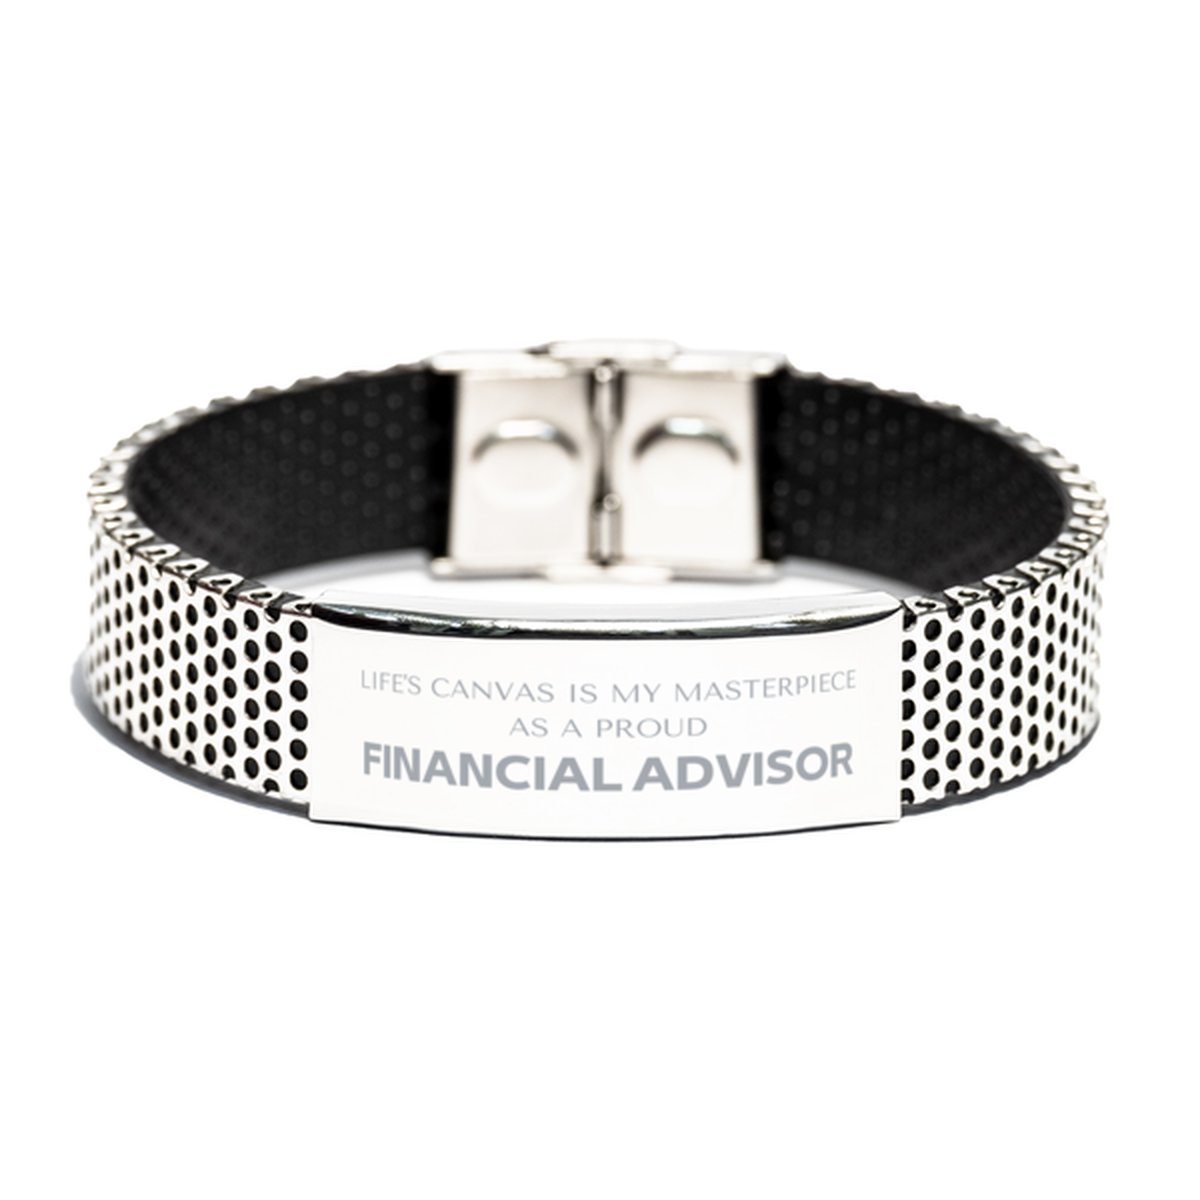 Proud Financial Advisor Gifts, Life's canvas is my masterpiece, Epic Birthday Christmas Unique Stainless Steel Bracelet For Financial Advisor, Coworkers, Men, Women, Friends